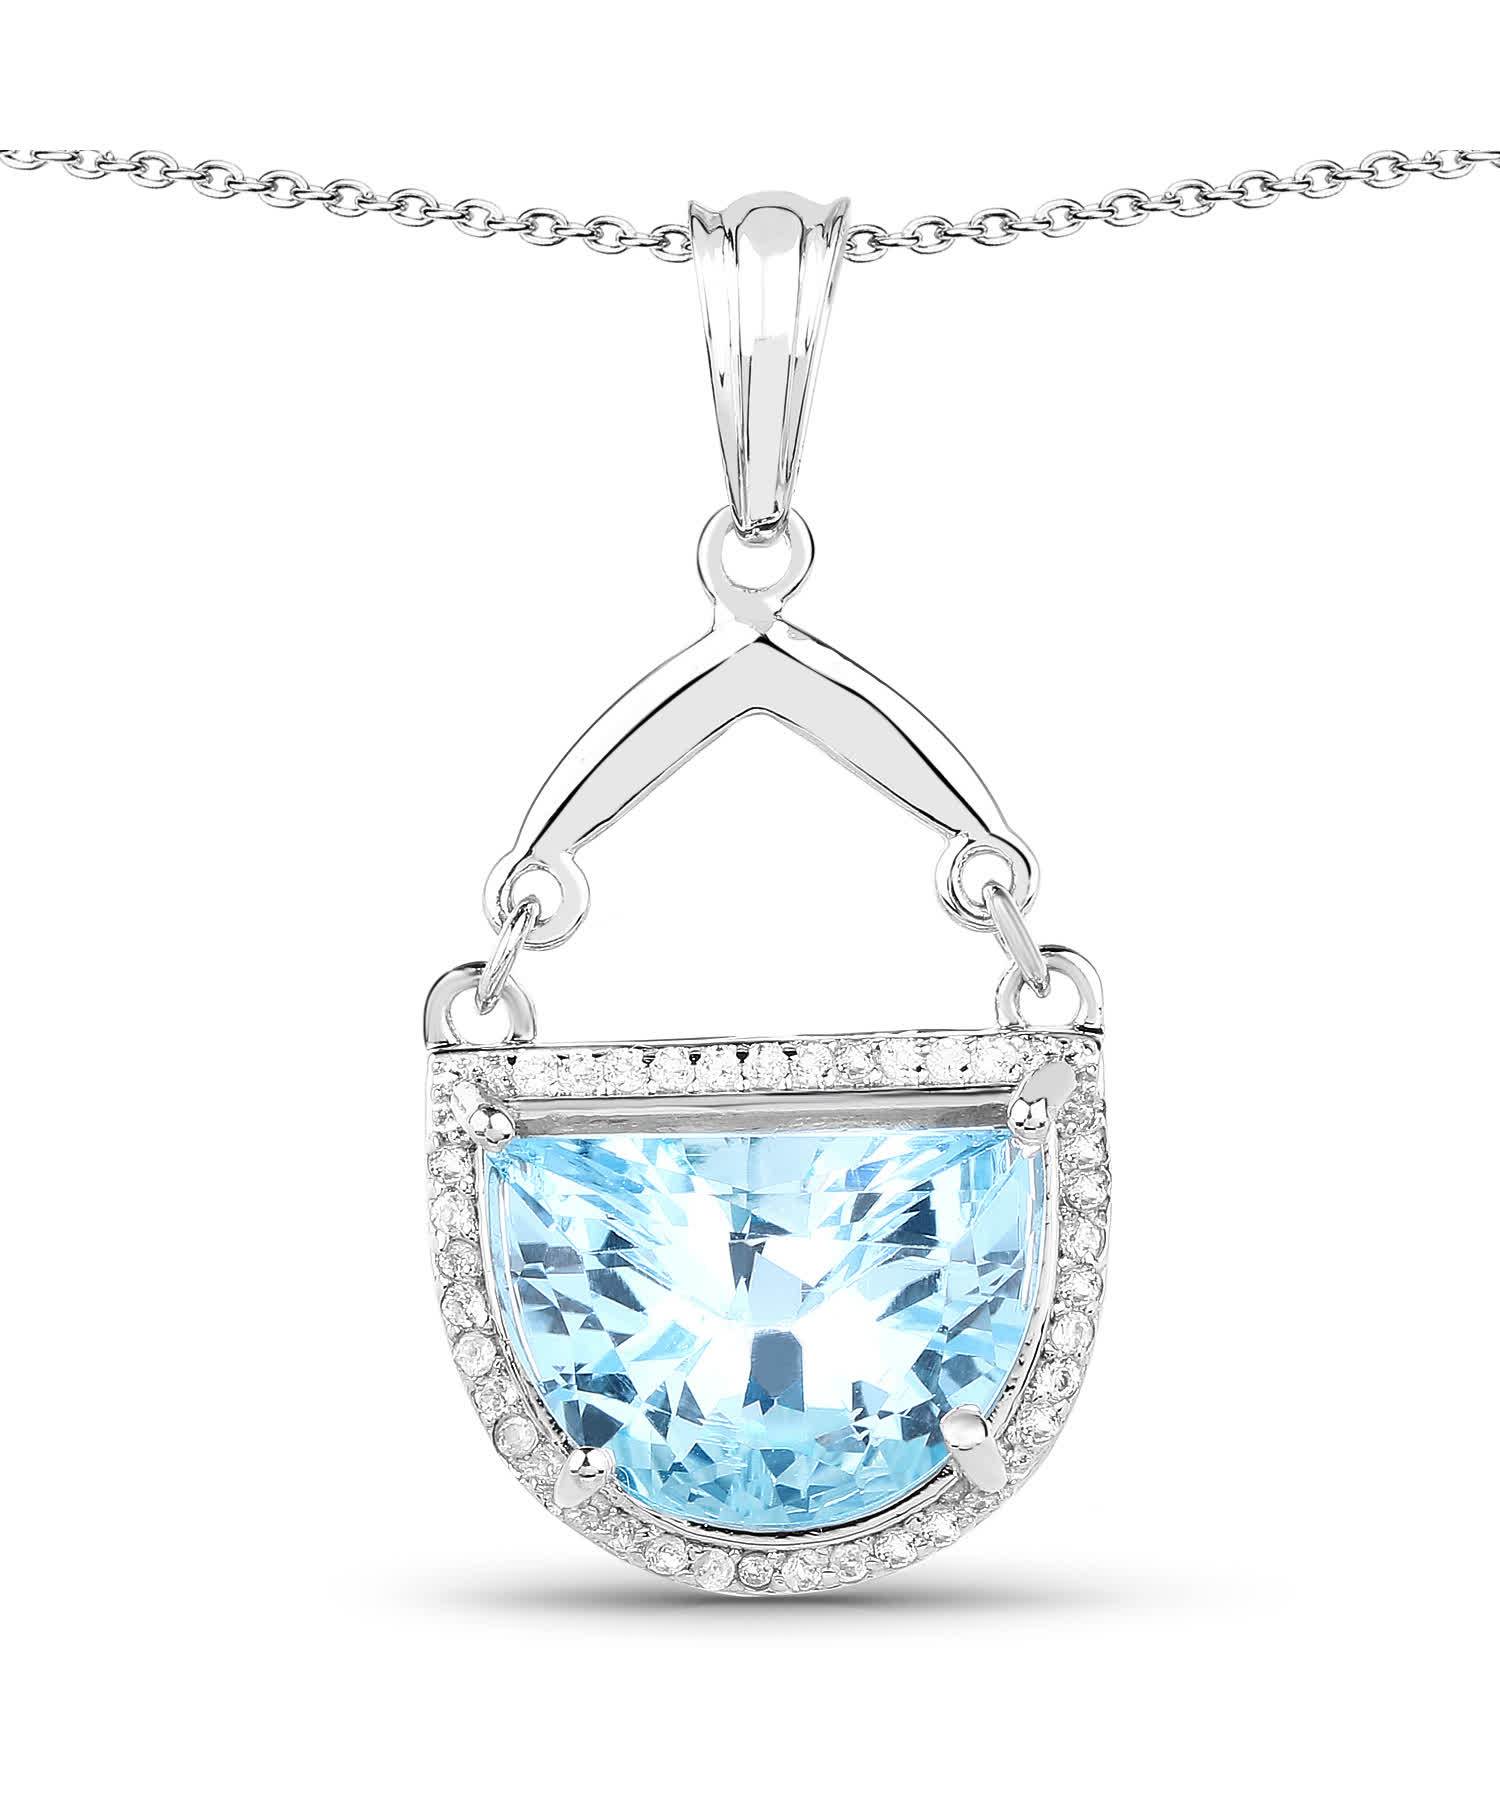 4.08ctw Natural Swiss Blue Topaz Rhodium Plated 925 Sterling Silver Pendant With Chain View 1